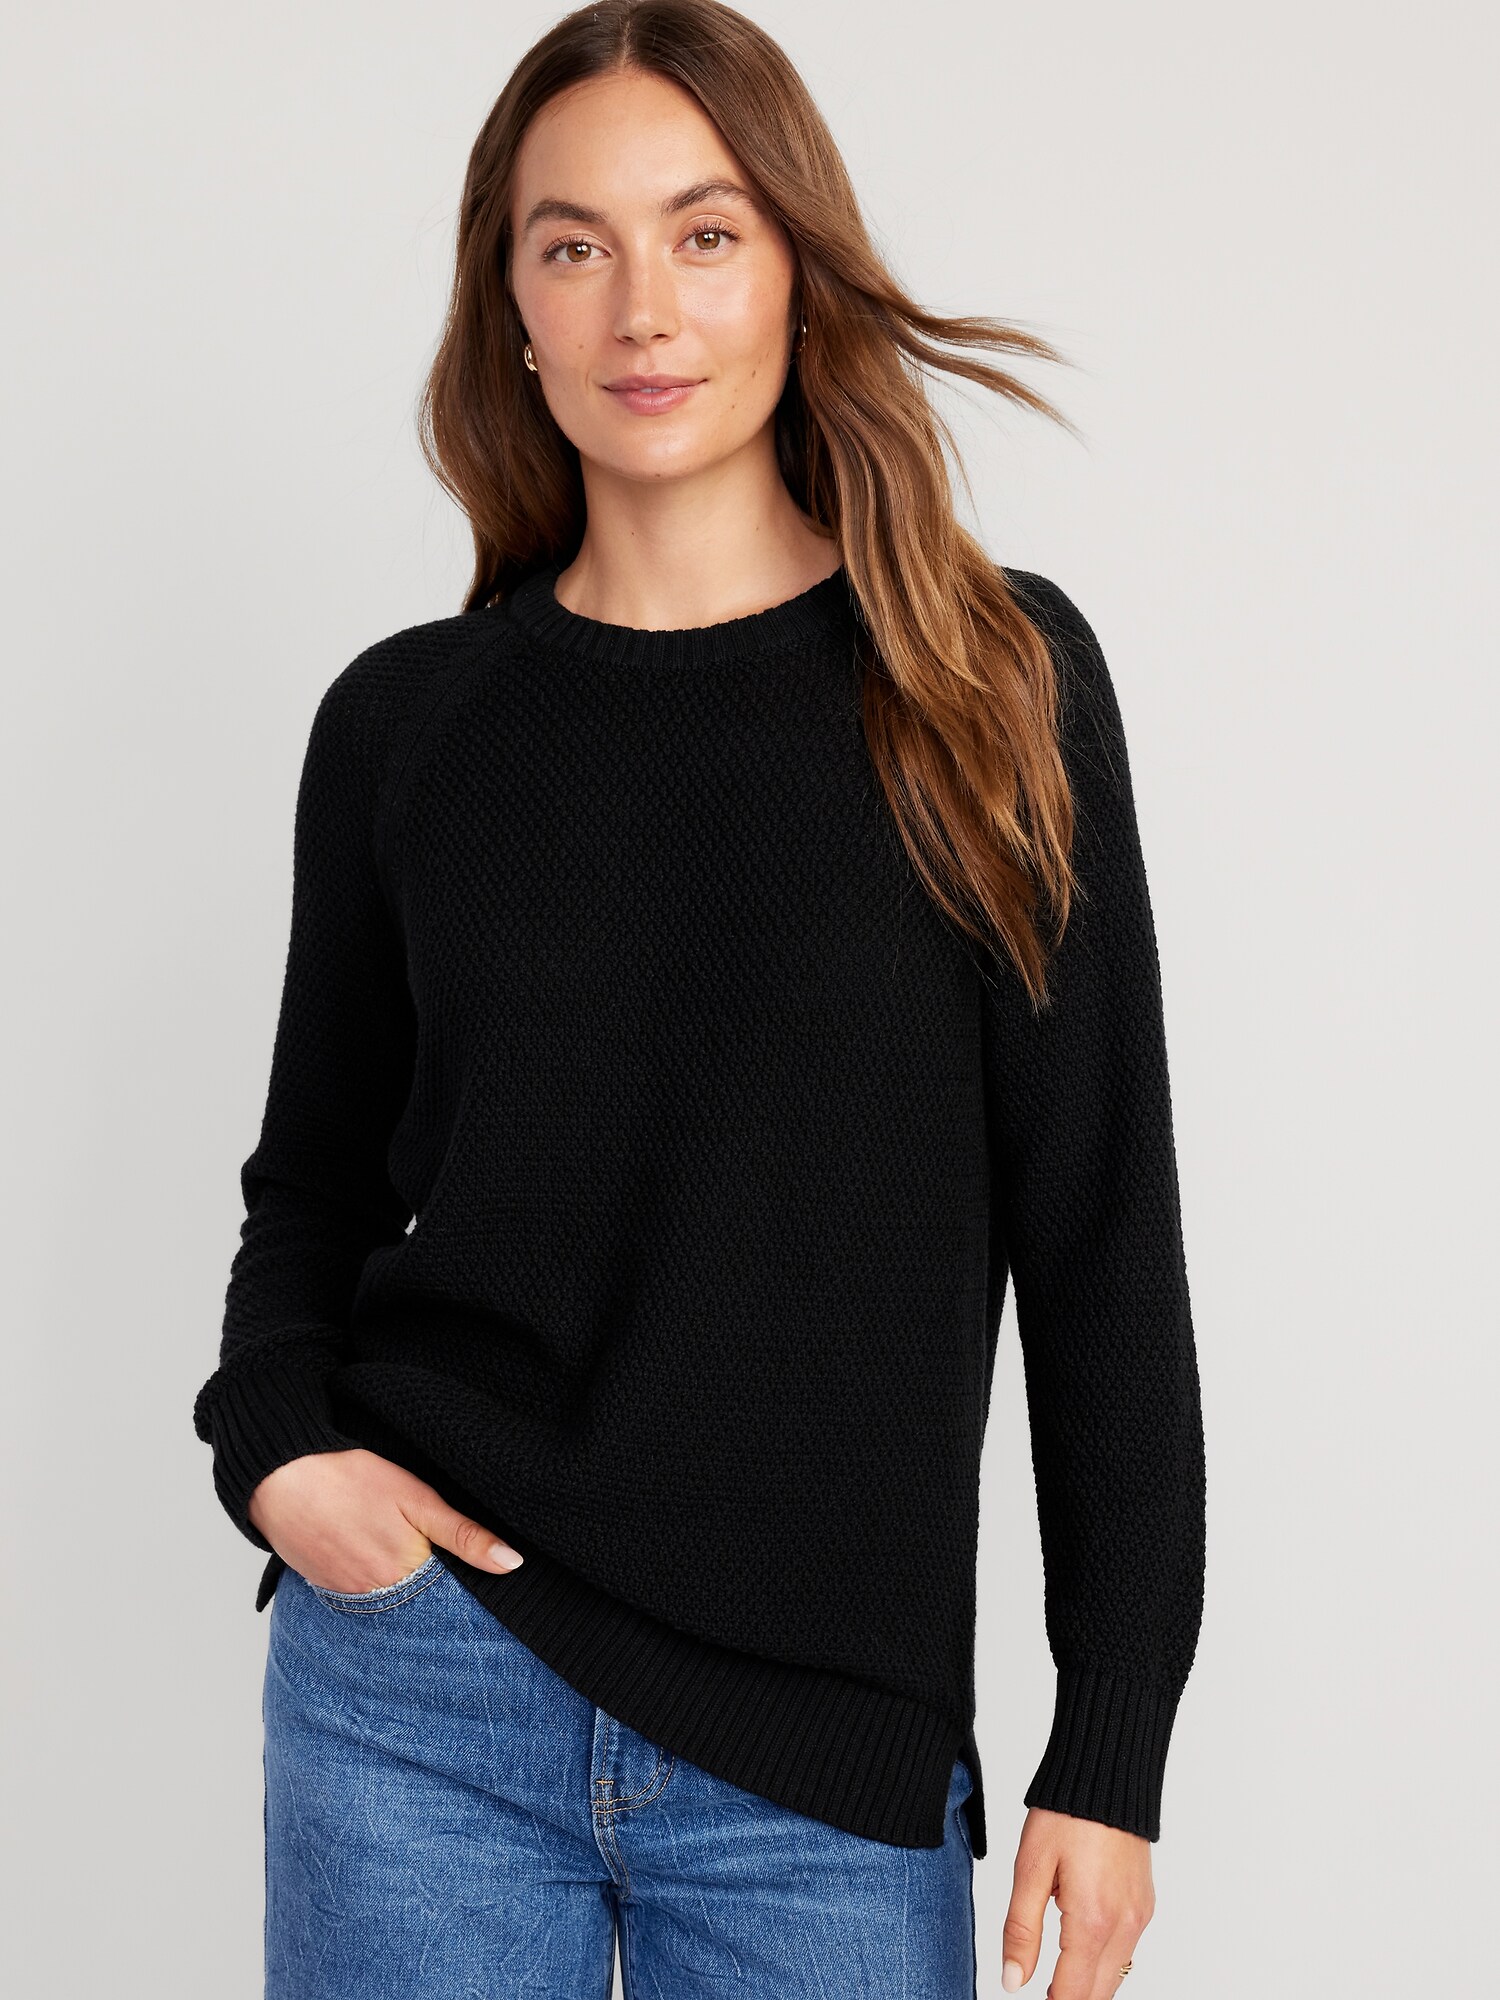 Textured Pullover Tunic Sweater for Women